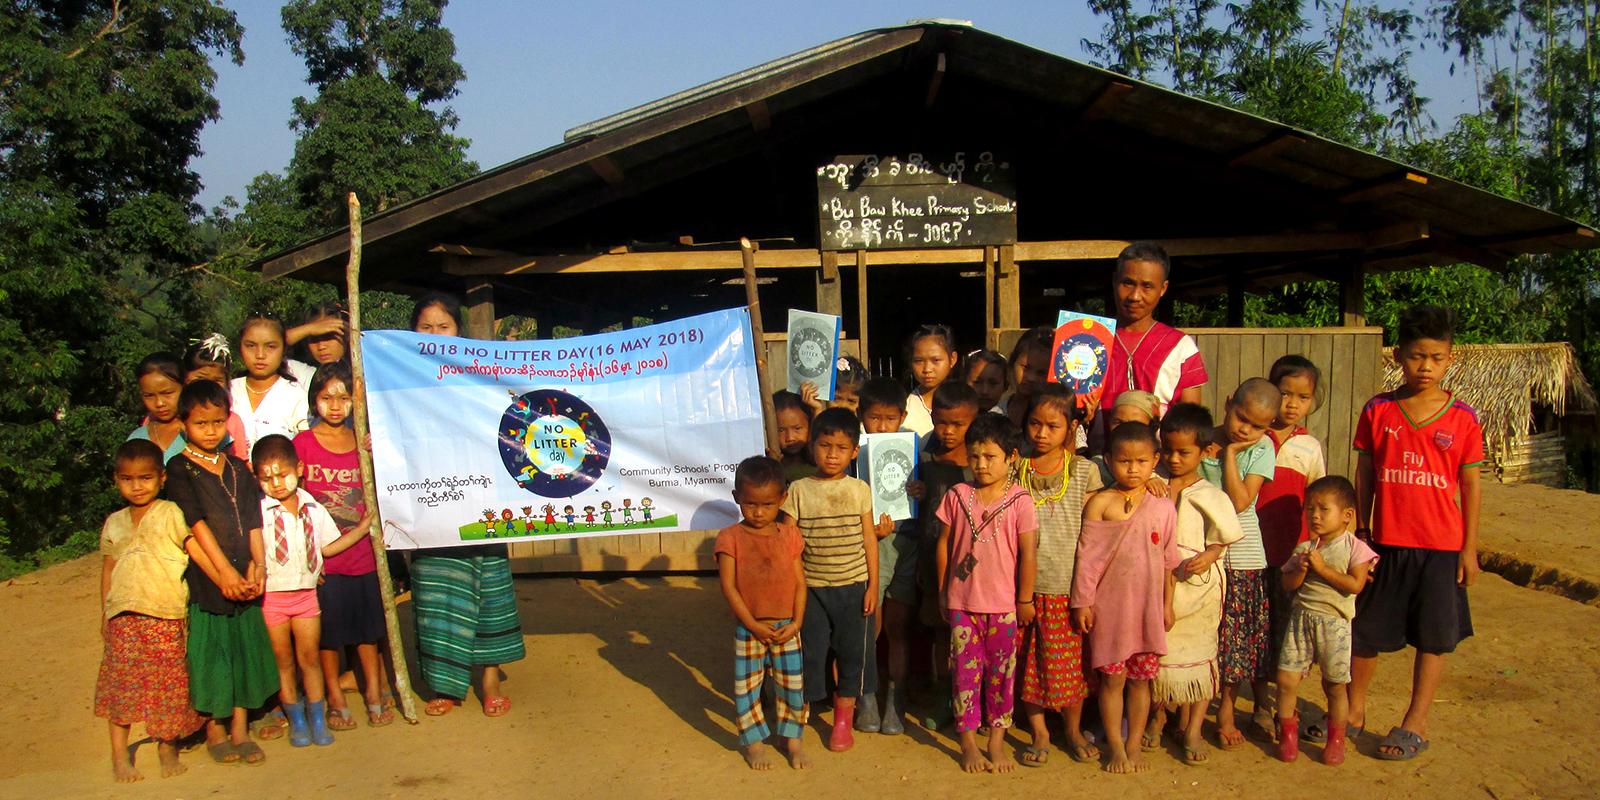 Children standing in front of a house, holding a banner